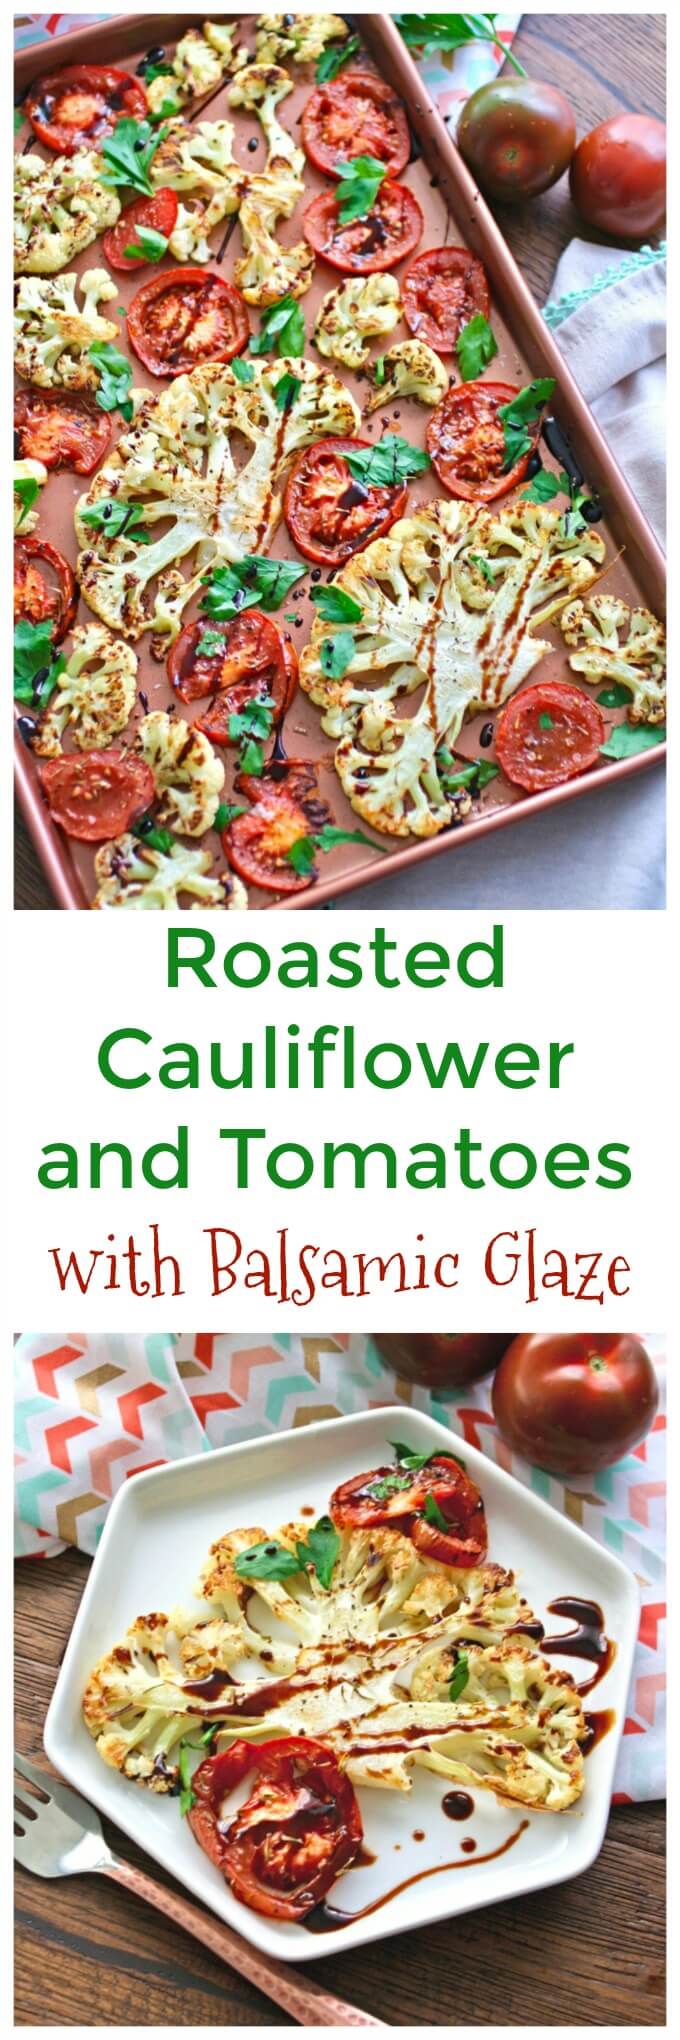 Roasted Cauliflower and Tomatoes with Balsamic Glaze is perfect as a side. You could aslo serve it as part of a meatless main dish meal.